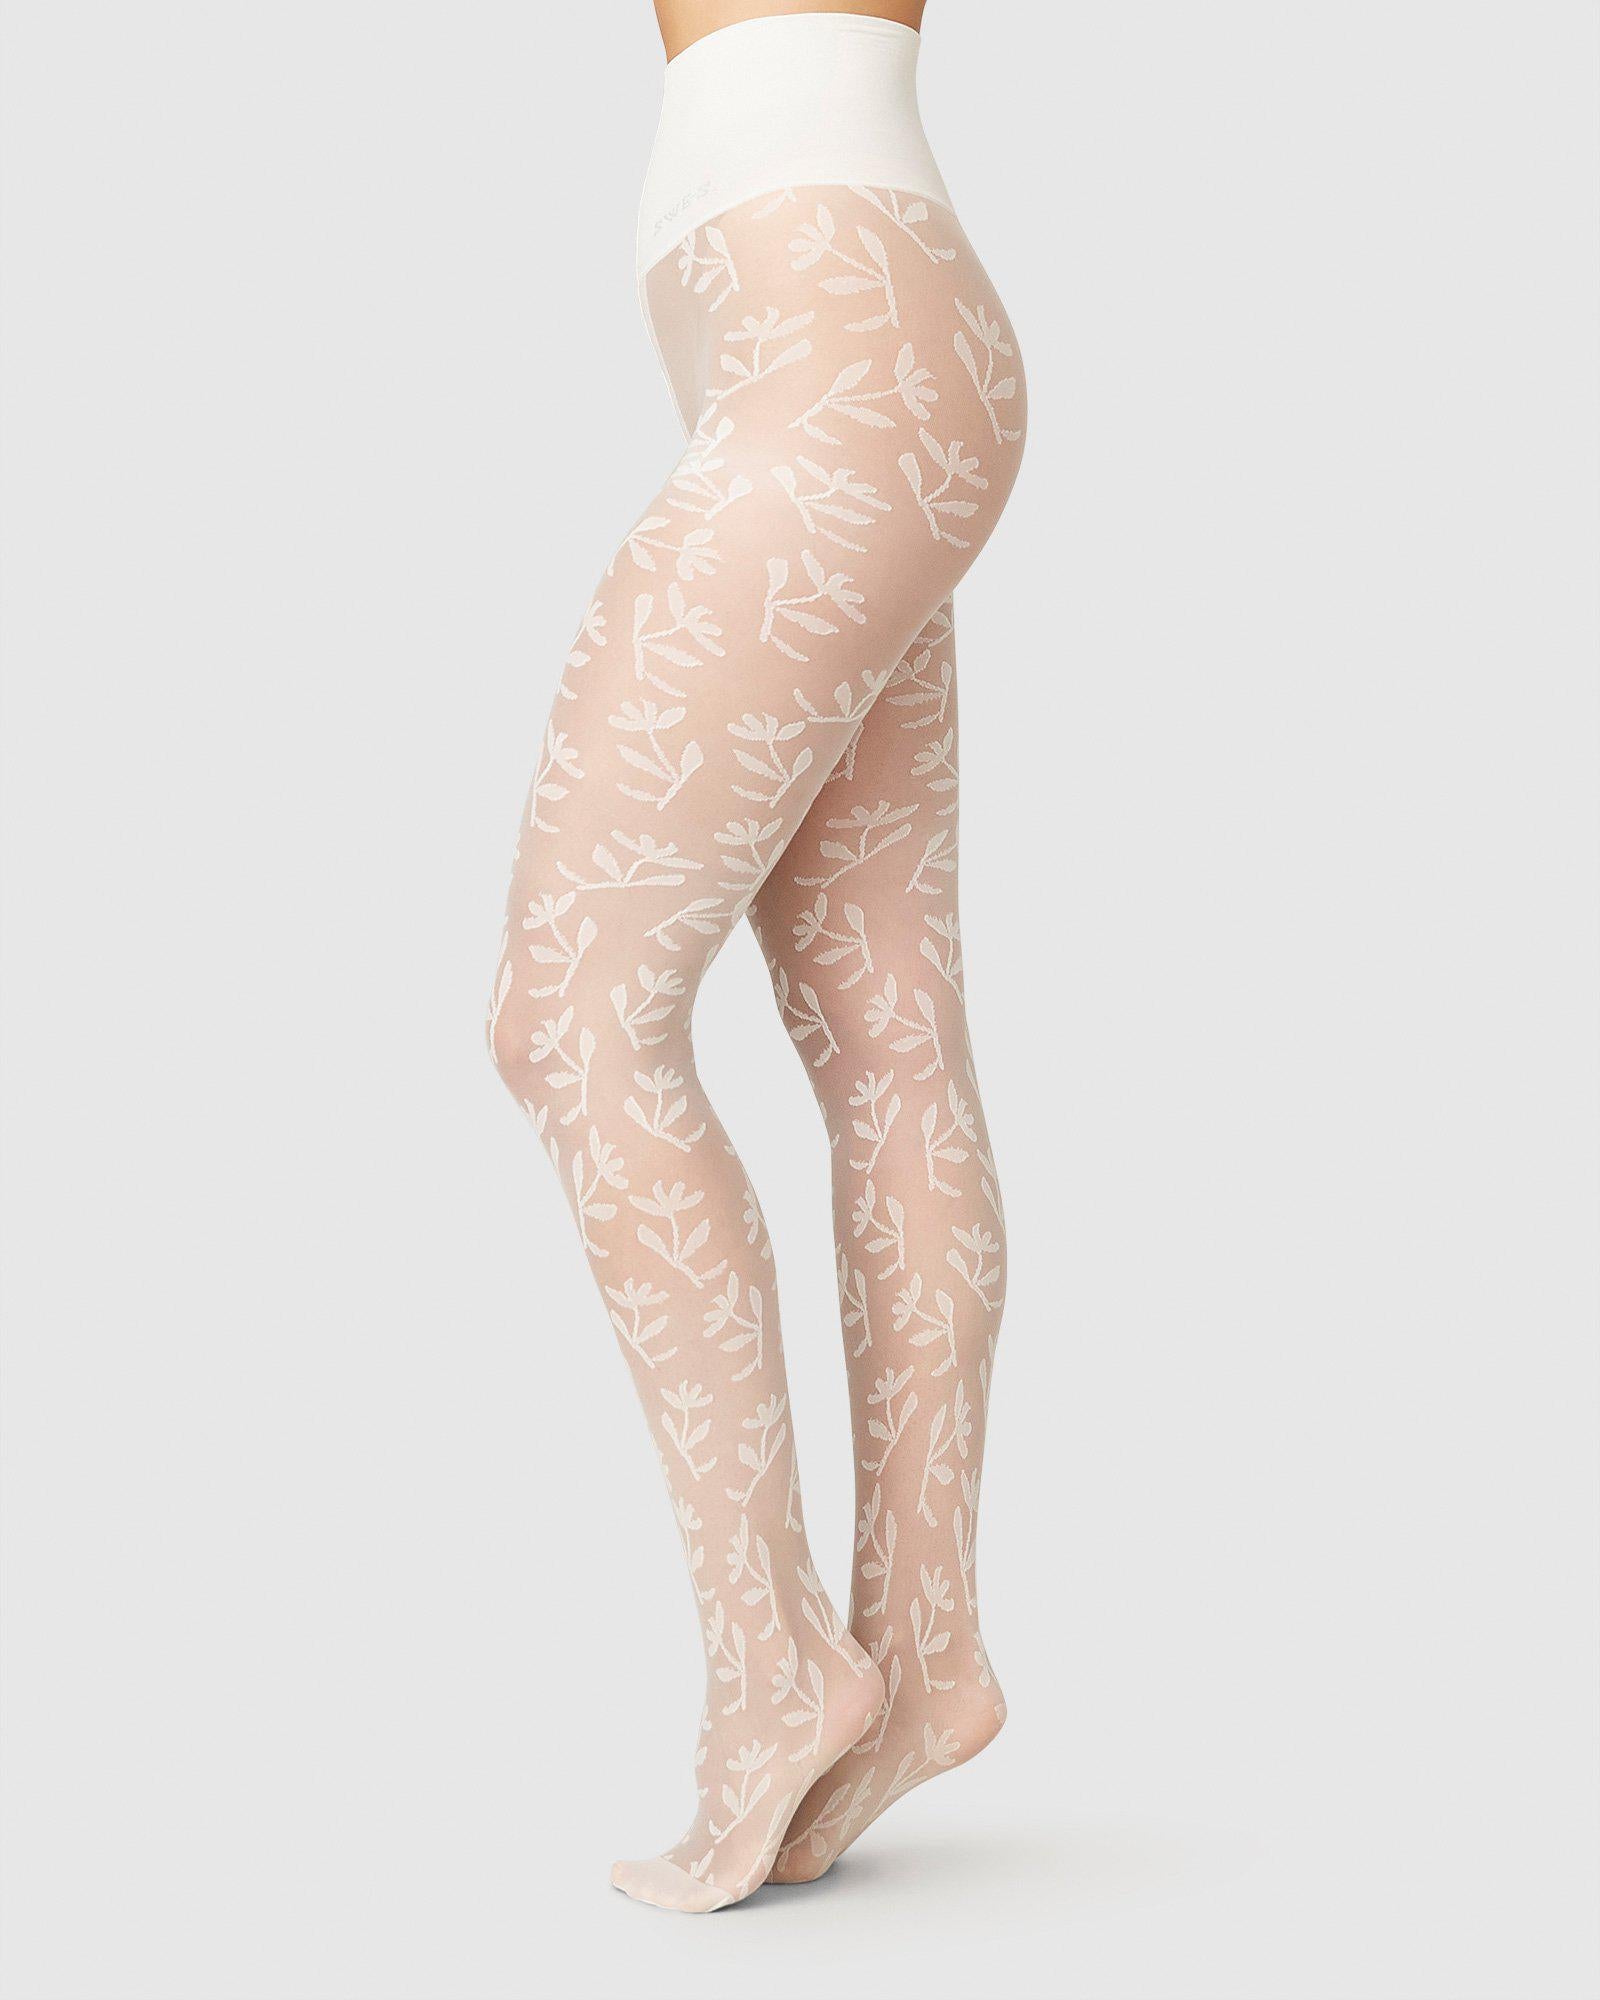 White Lace Tights 